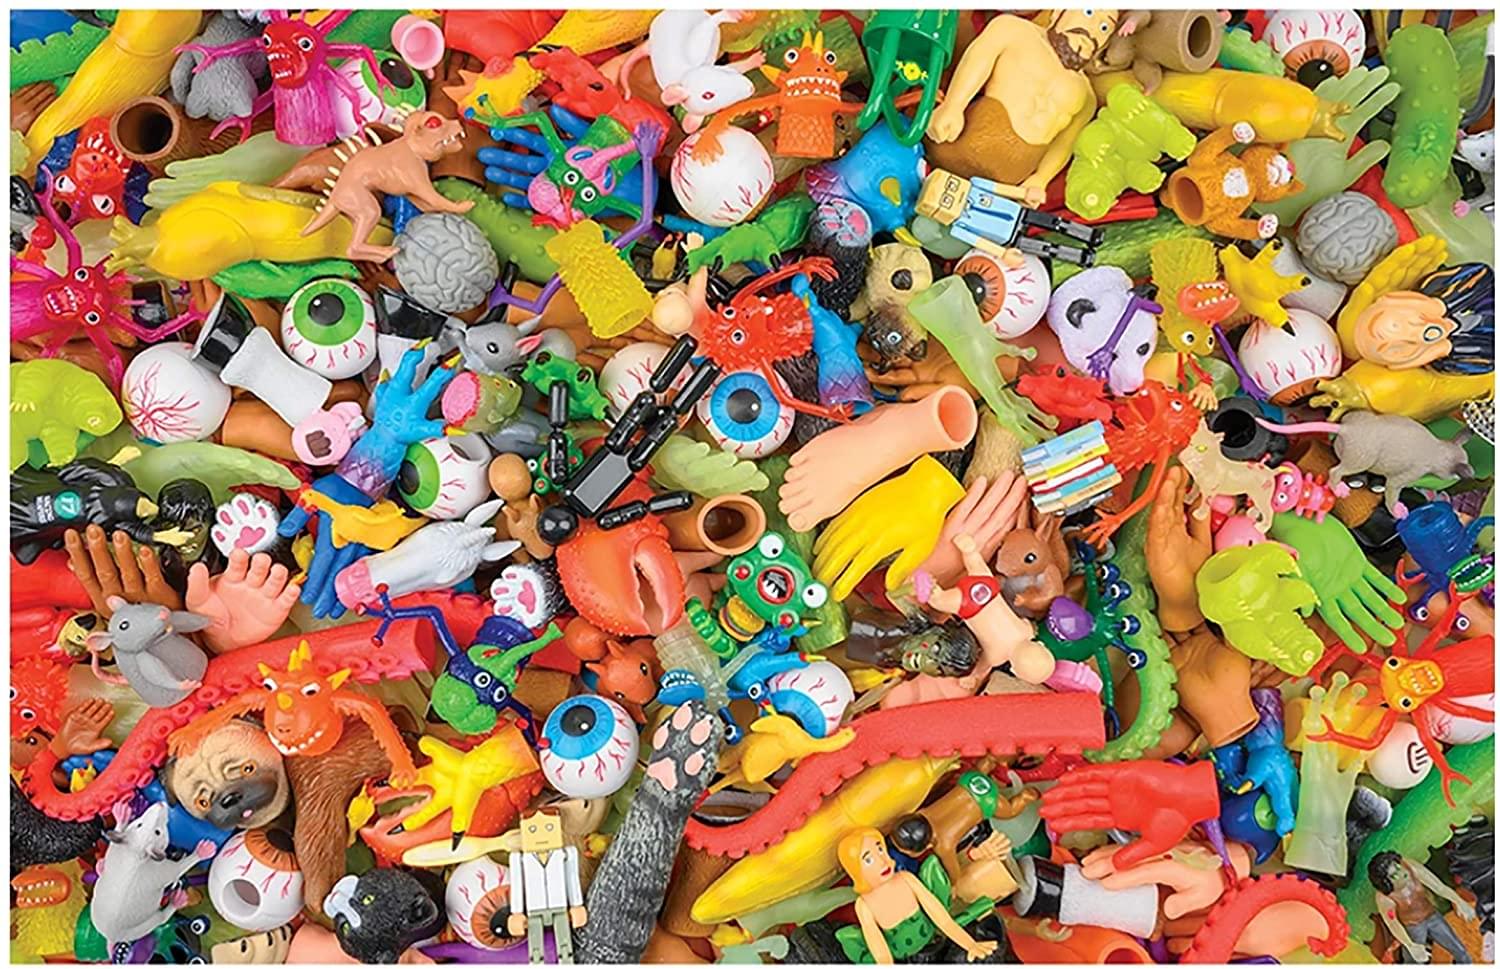 Toy Explosion 1000 Piece Jigsaw Puzzle